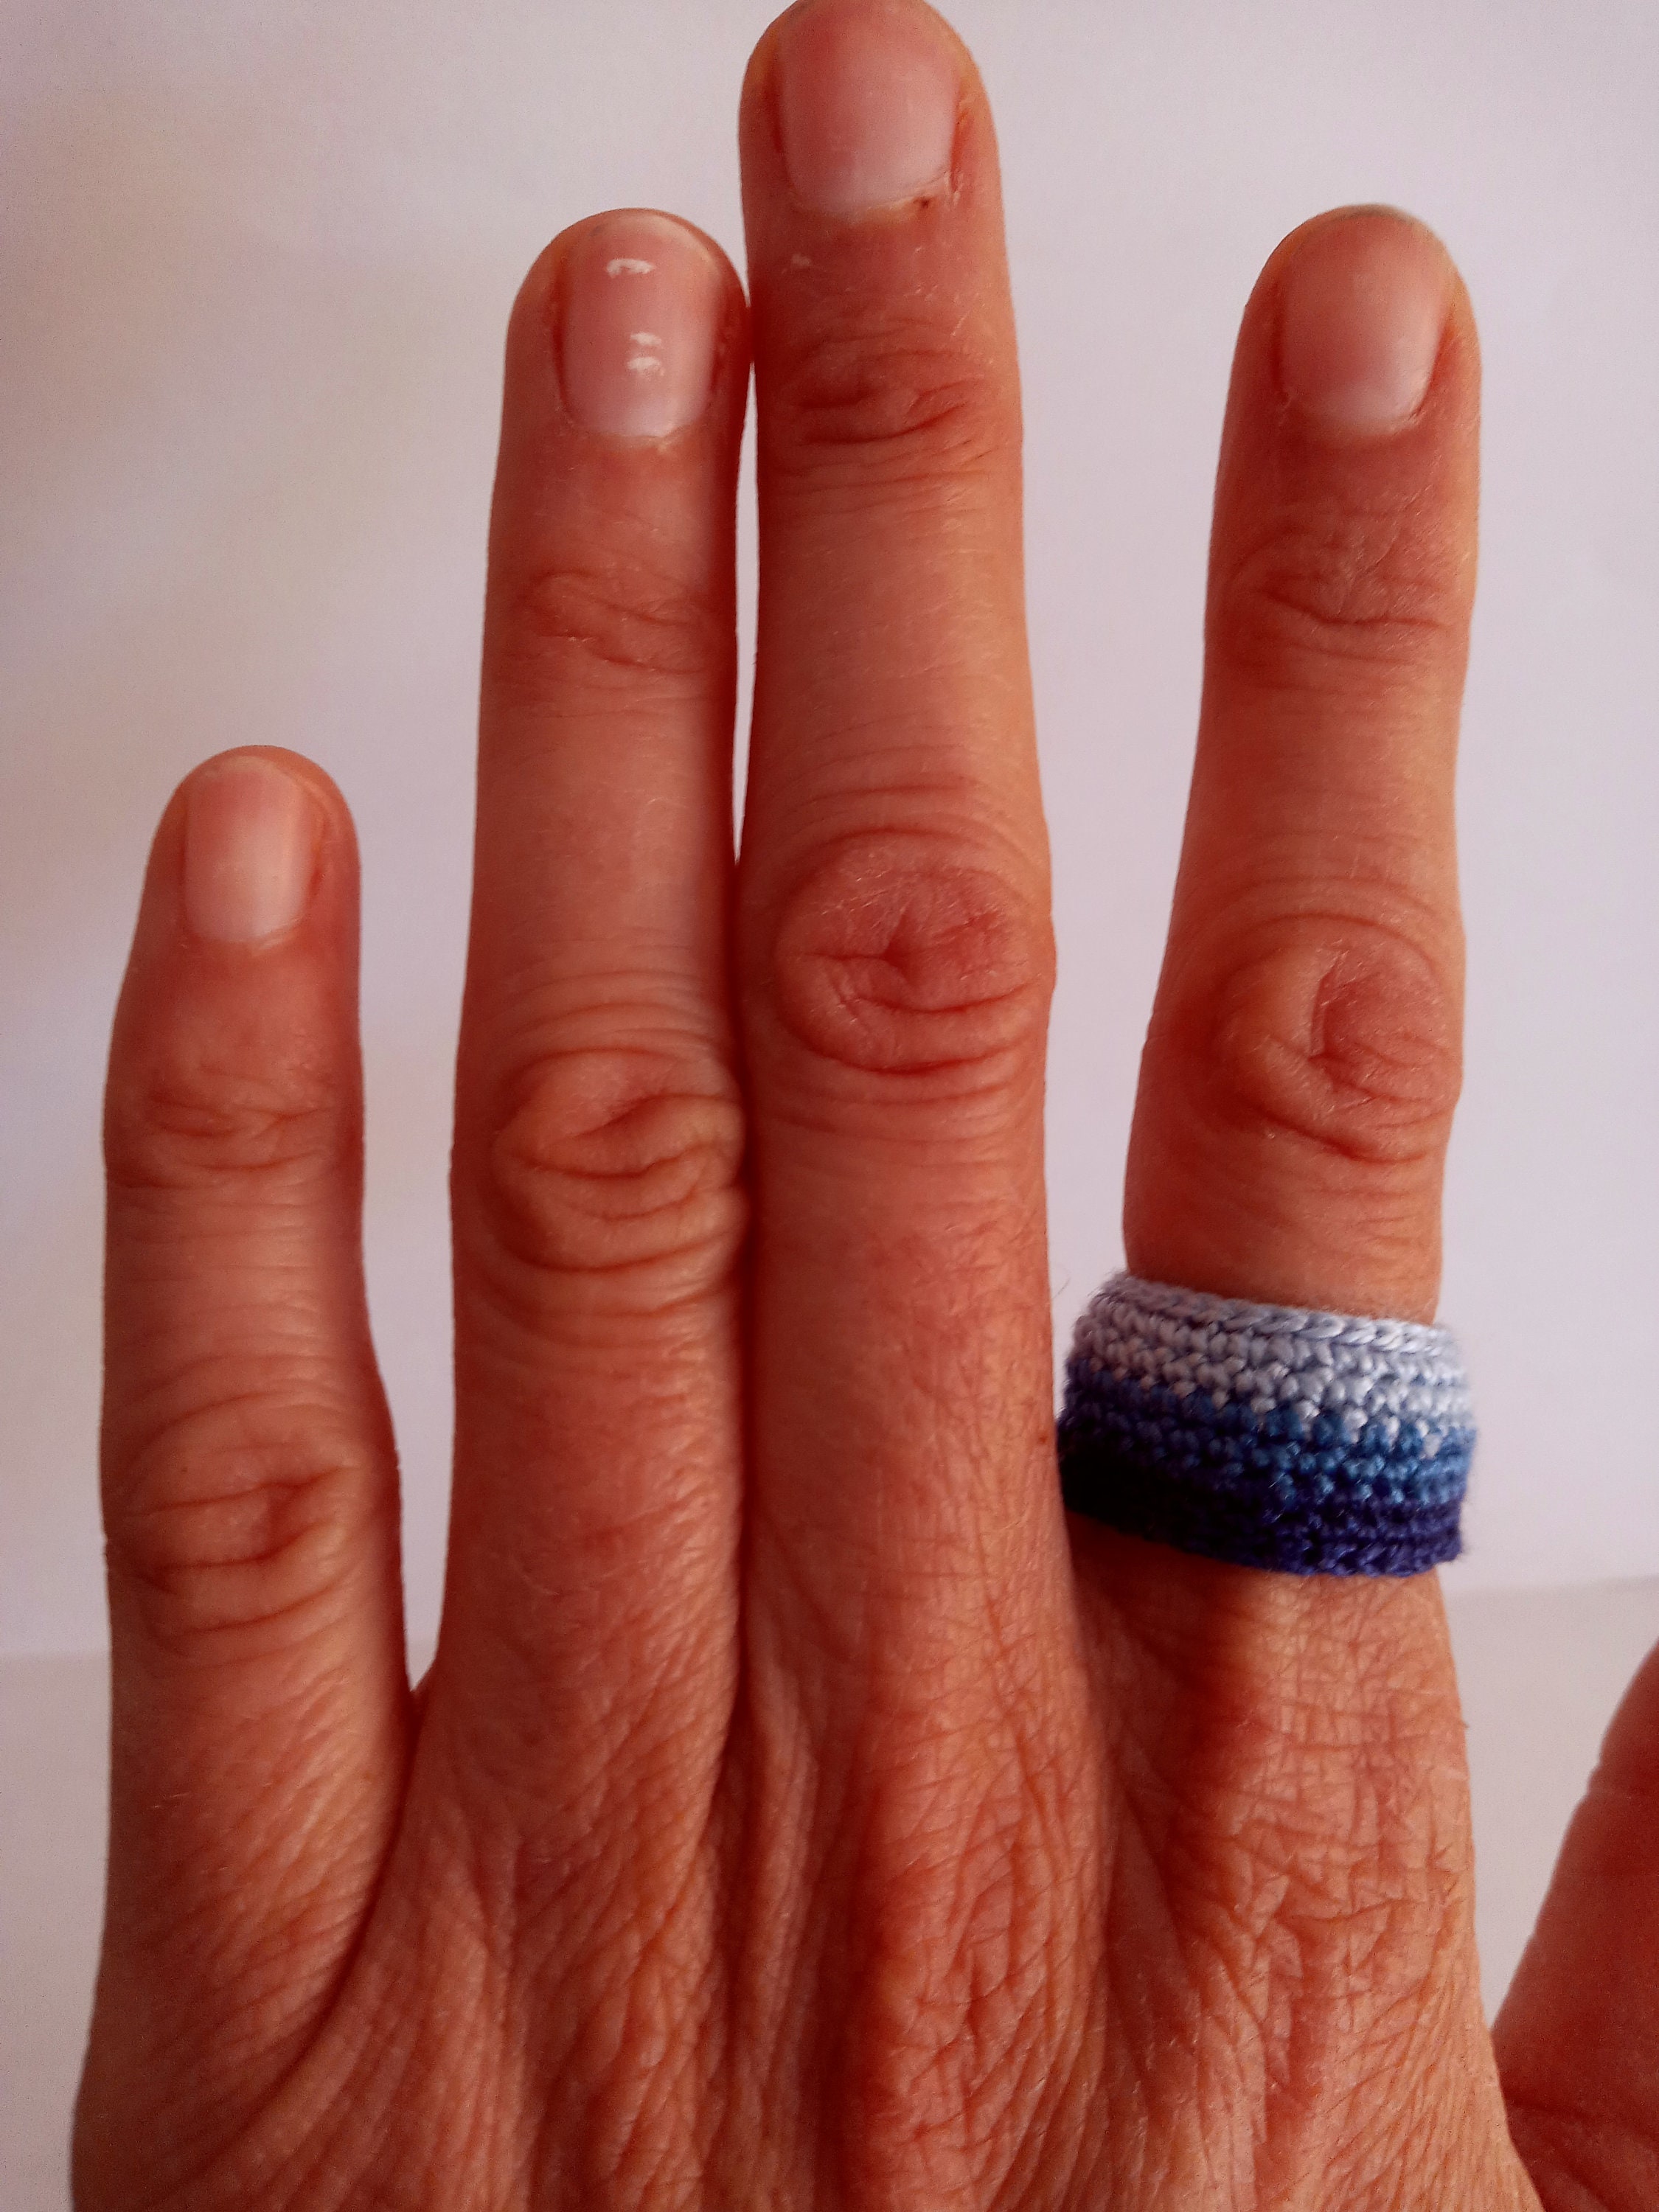 Crochet Rings, Finger Bands, Antiallergenic Rings, Textile Jewelry, Boho  Jewelry, Friendship Rings, Modern Crochet Bands, Minimalist Jewels 